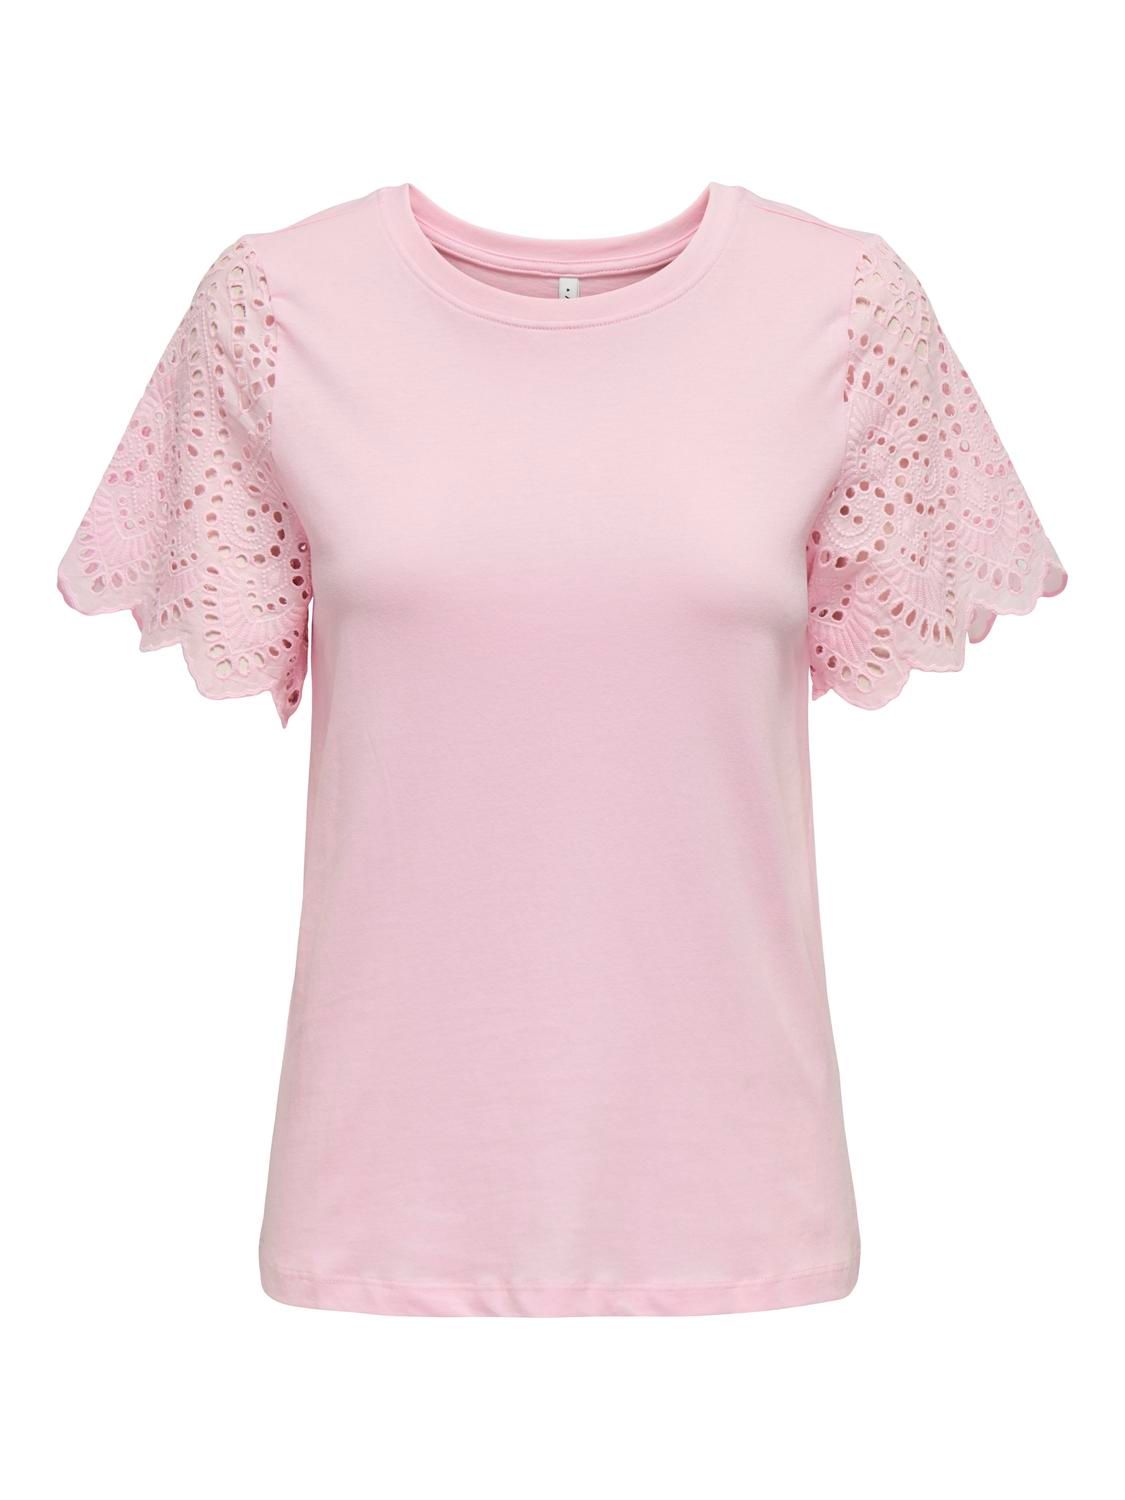 ONLEBBA LIFE S/S LACE TOP JRS